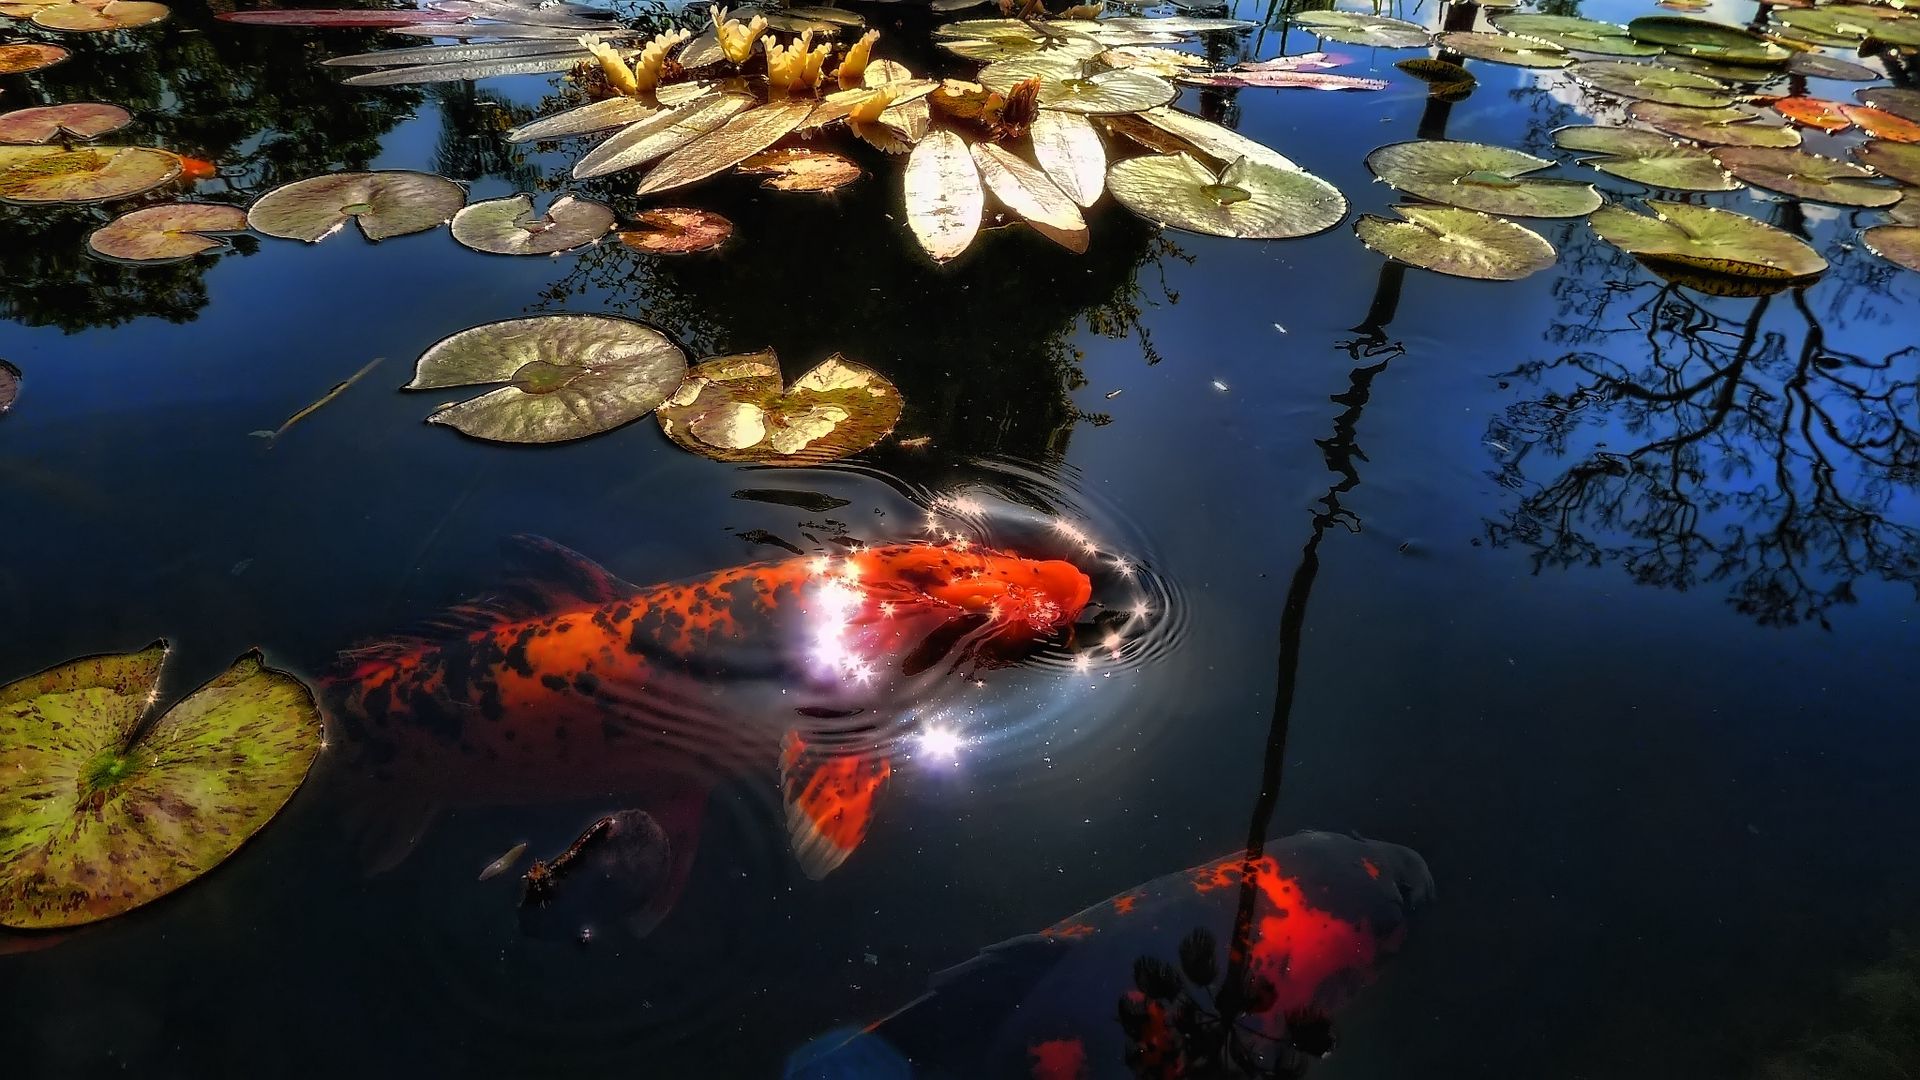 Download wallpaper 1920x1080 fish, lake, pond, sunlight, leaf, lily, reflection full hd, hdtv, fhd, 1080p HD background